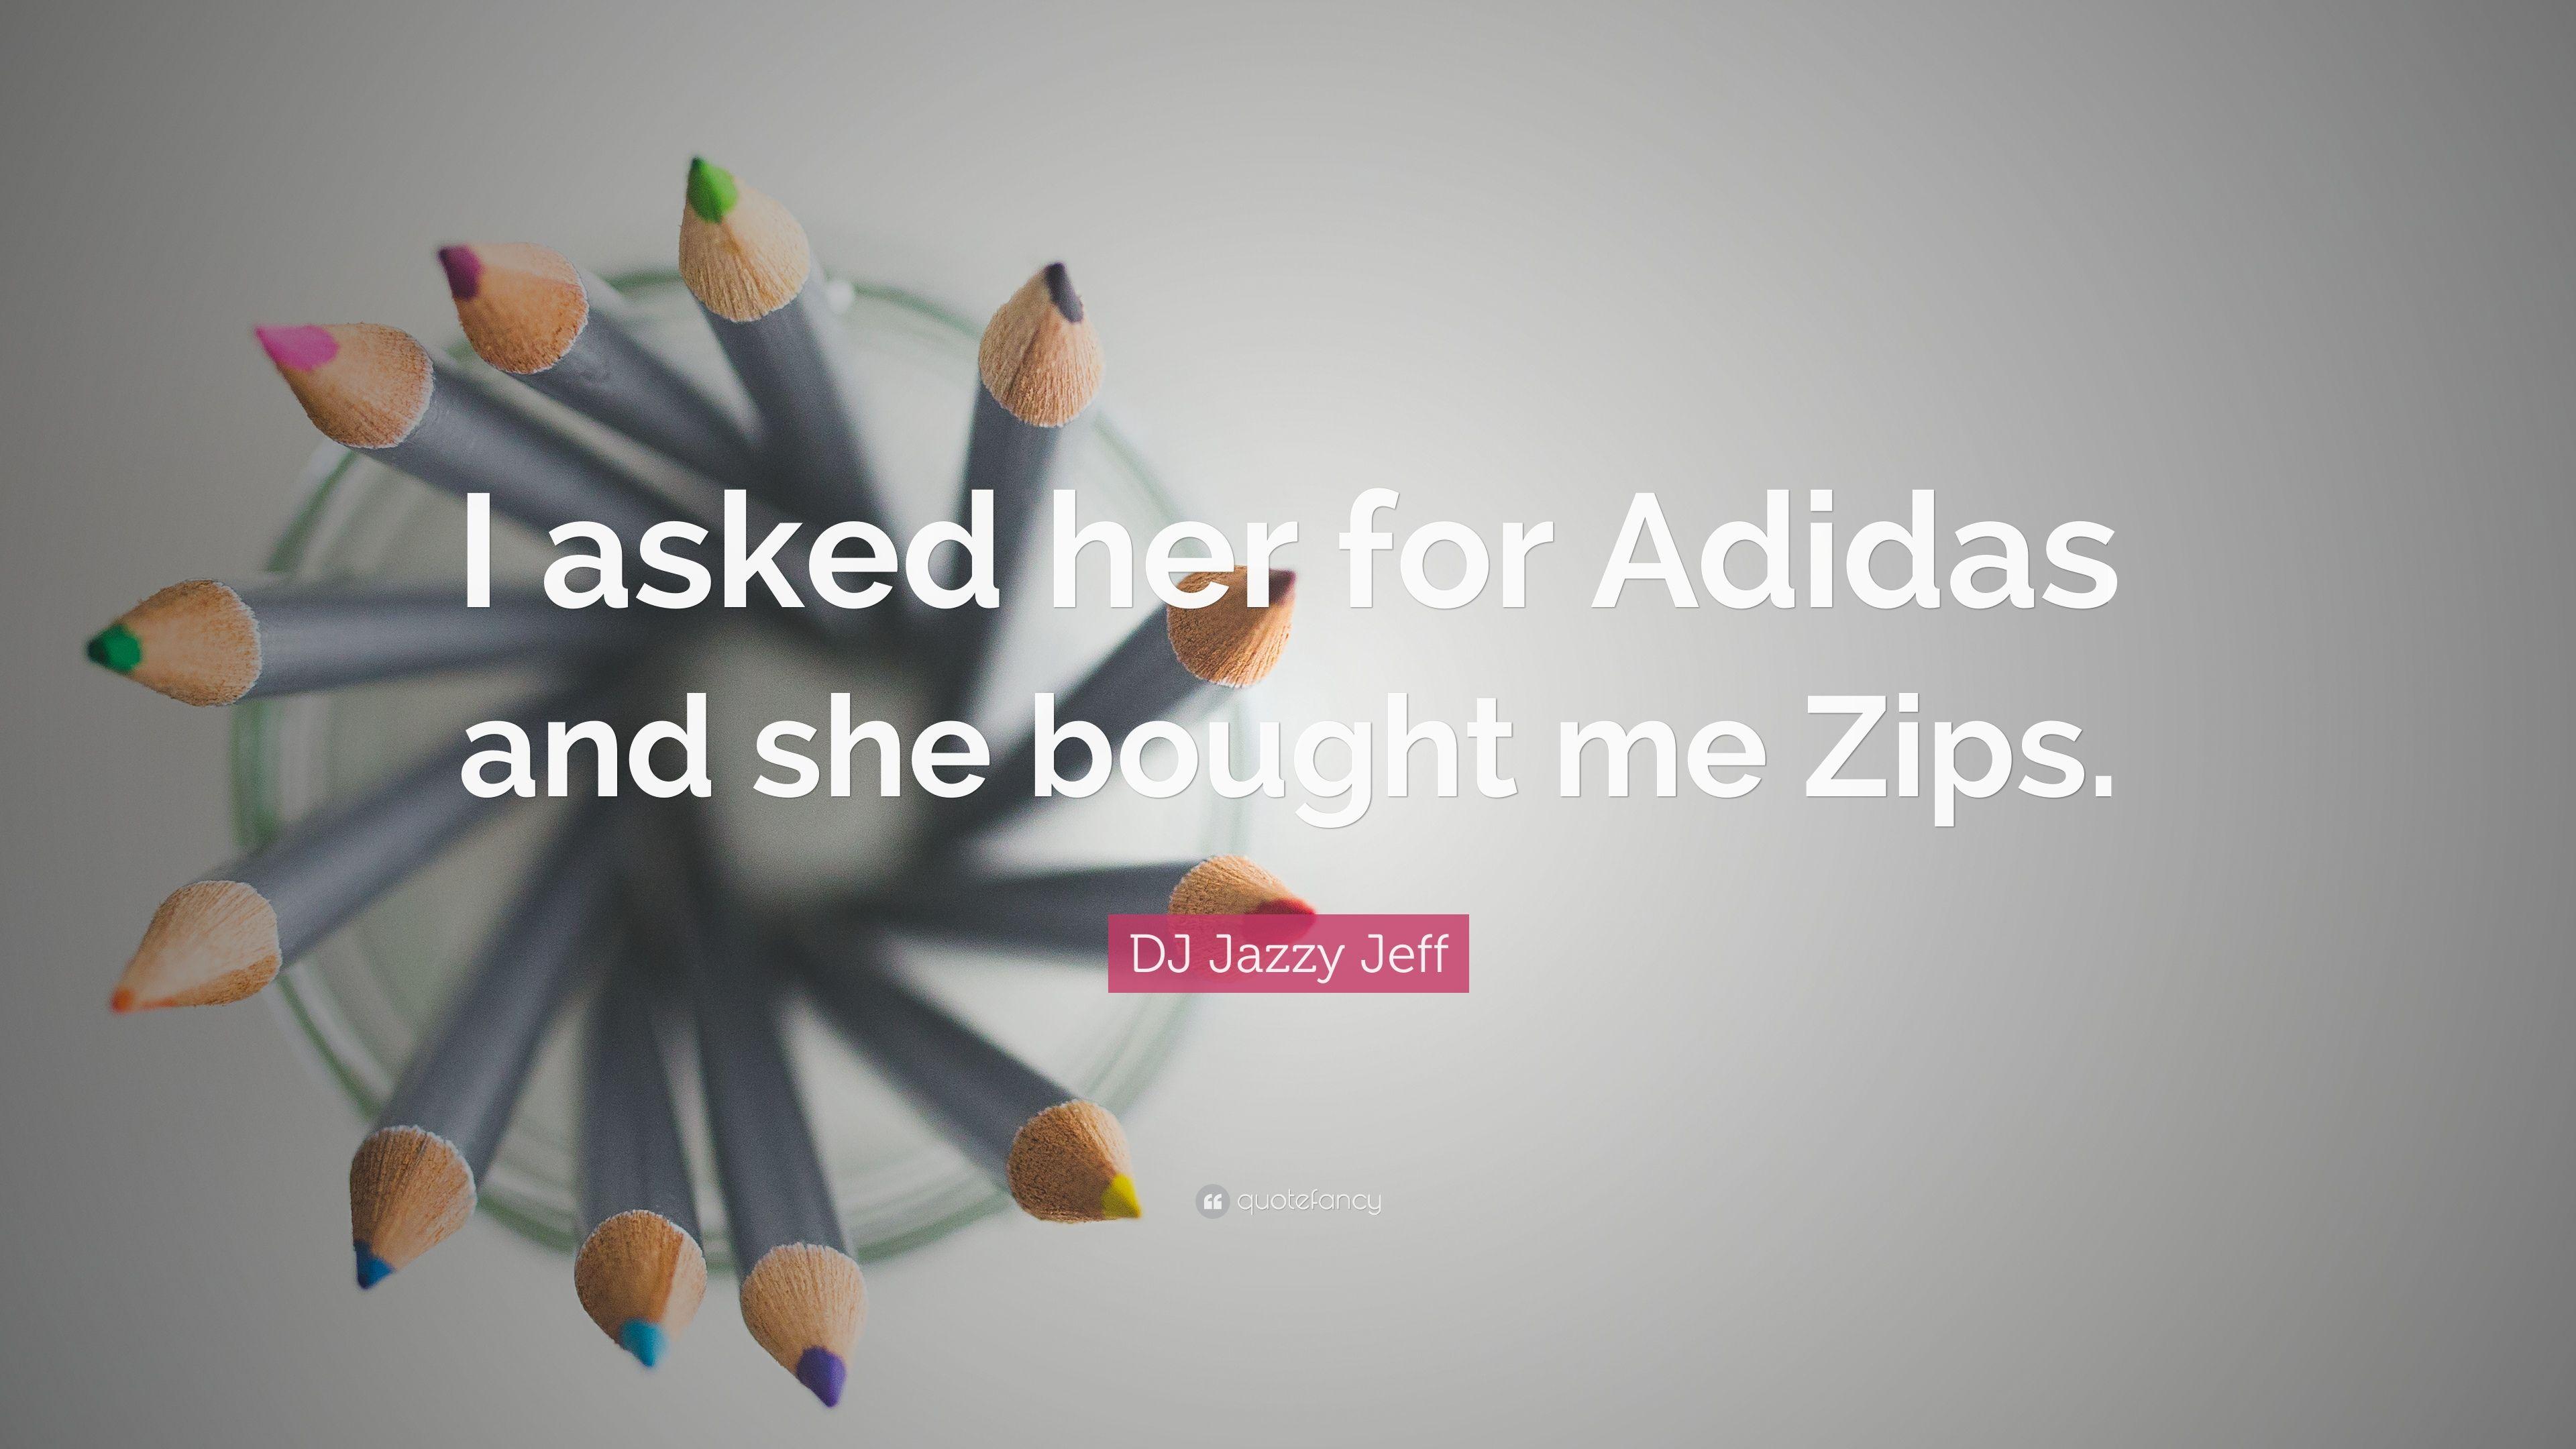 DJ Jazzy Jeff Quote: “I asked her for Adidas and she bought me Zips